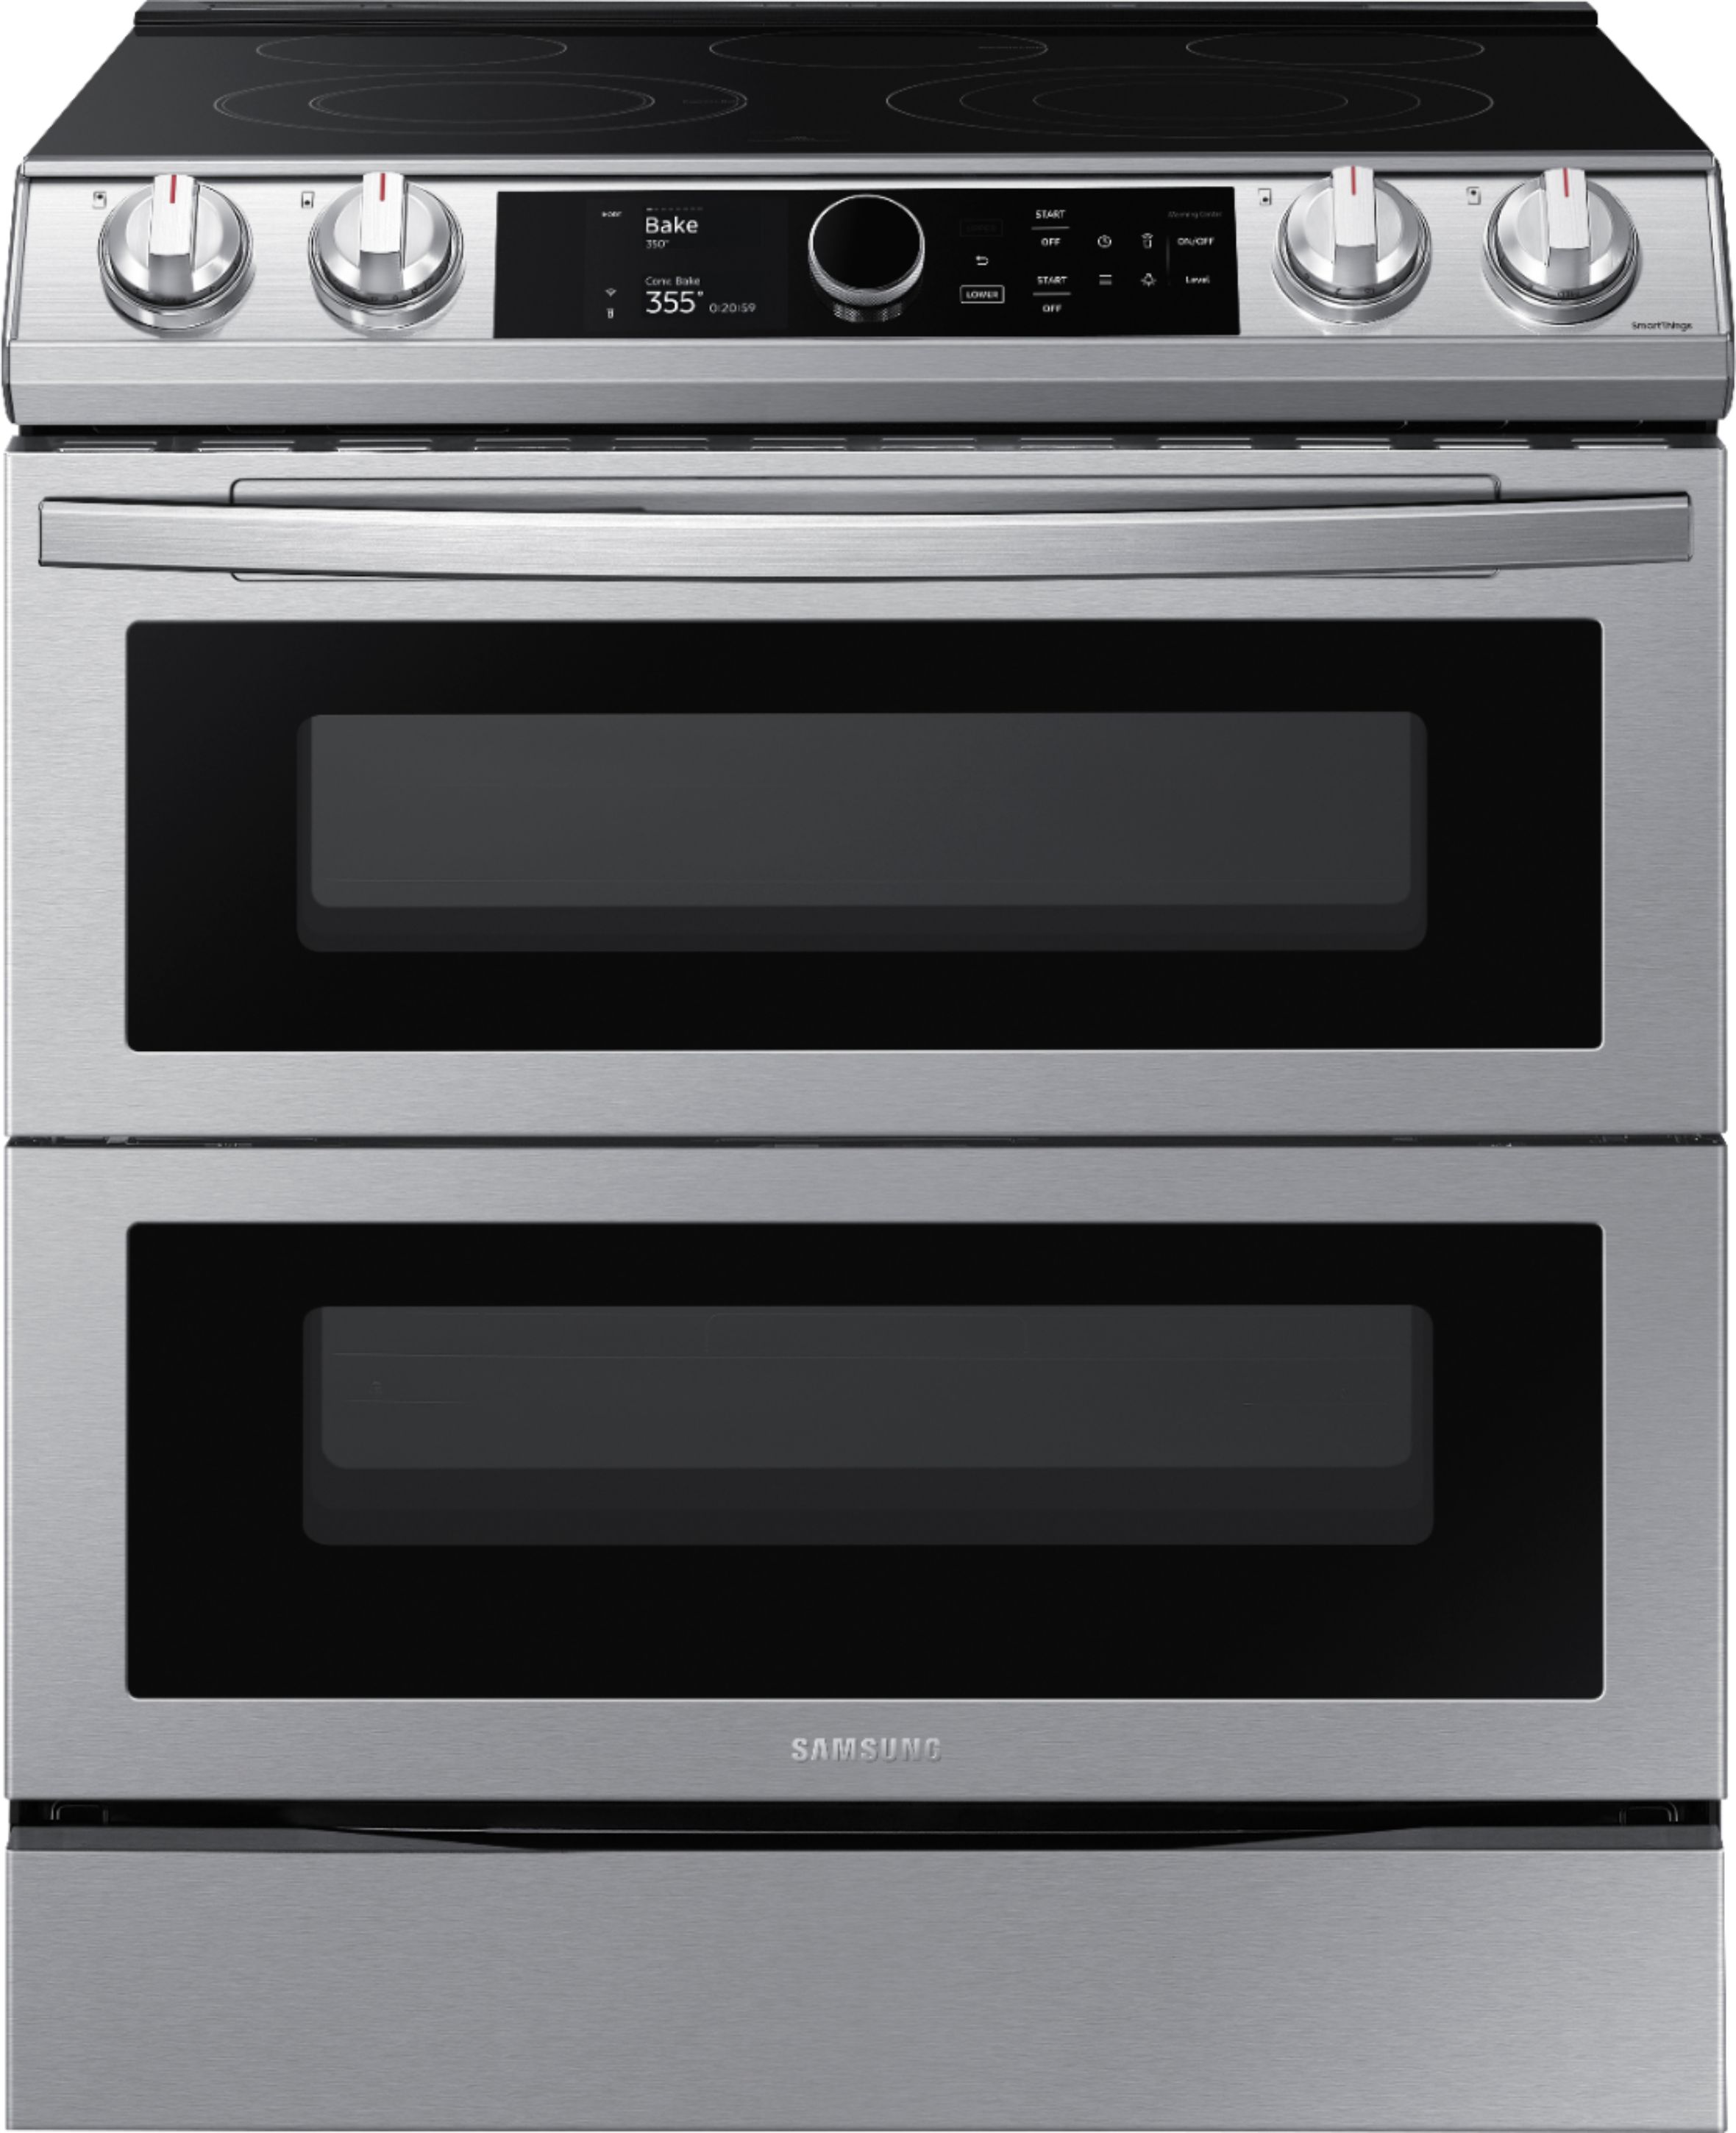 Samsung 6.3 Cu. Ft. Front Control Slide-in Electric Range with Smart Dial,  Air Fry and Wi-Fi in Black Stainless Steel